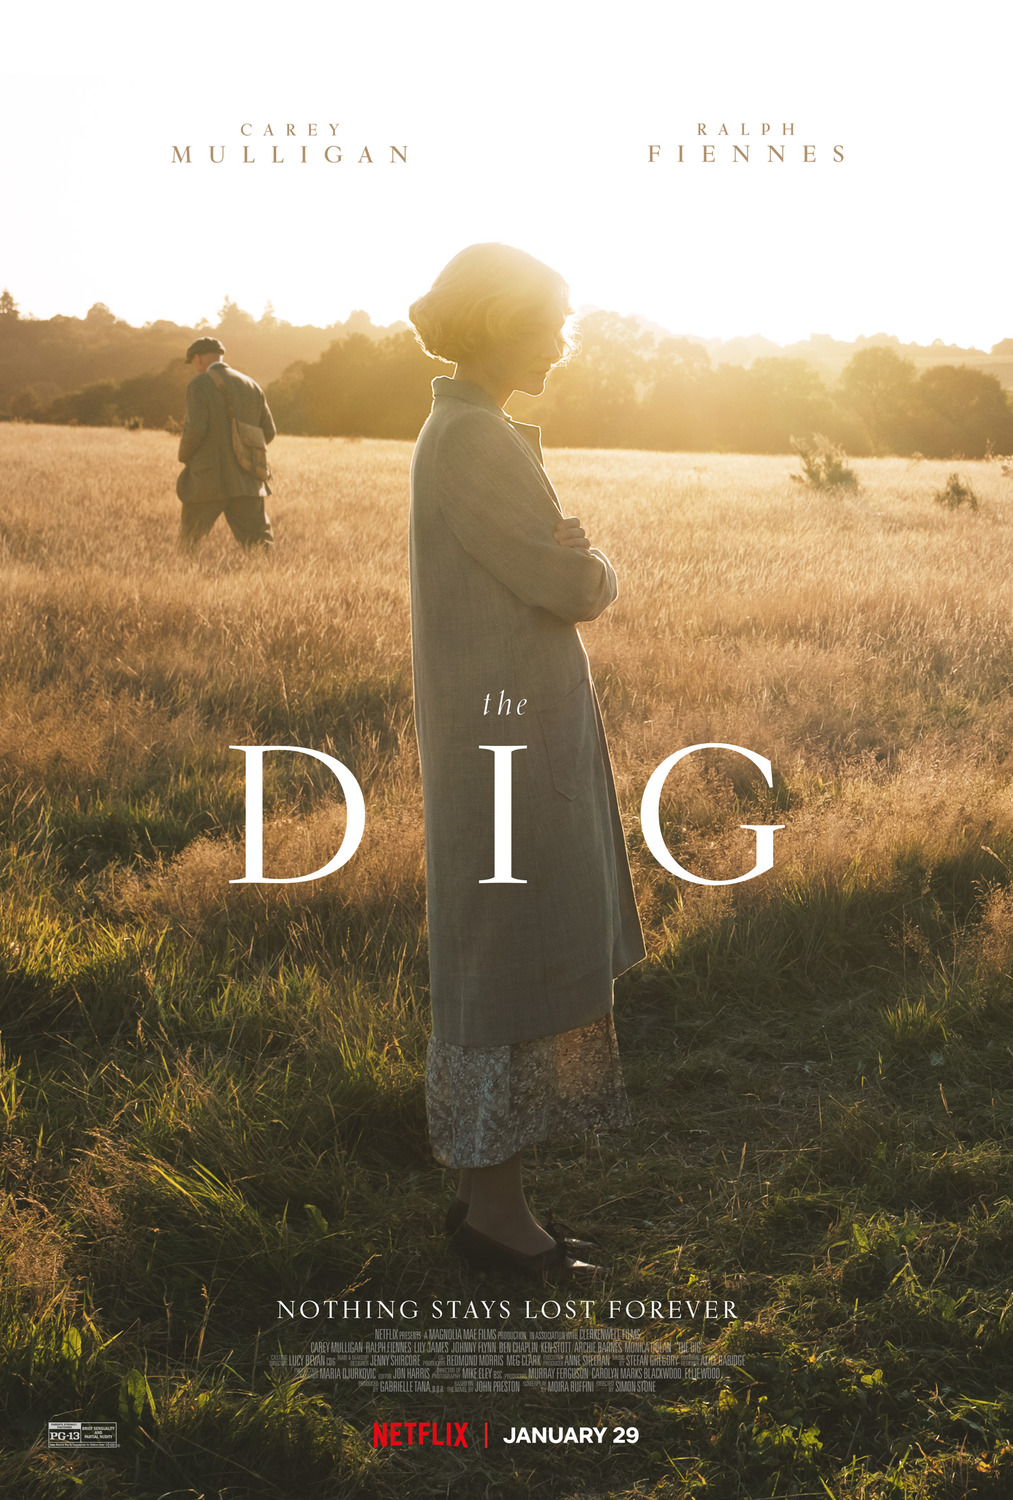 promotional poster for The Dig